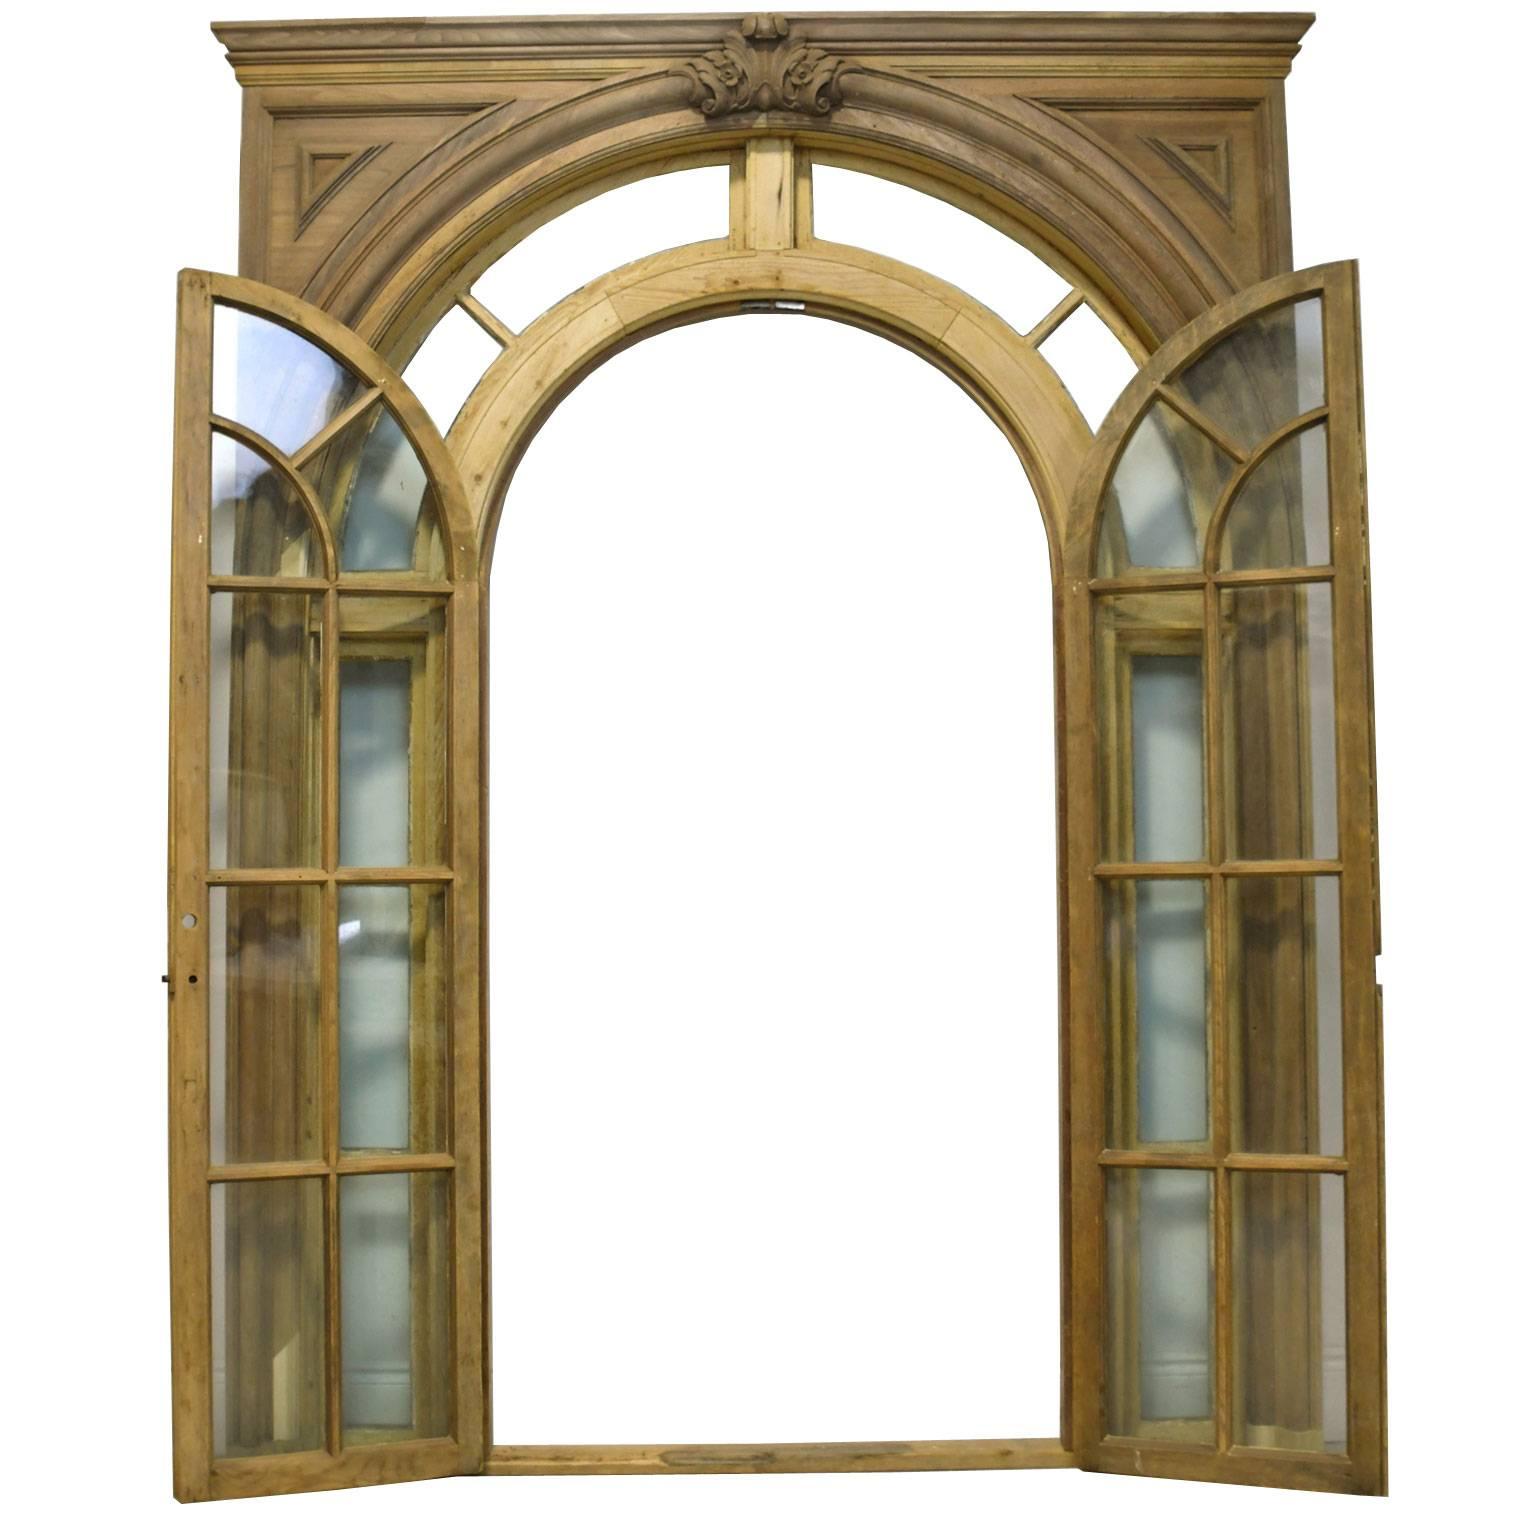 From the American Federal period, a magnificent pair of arched doors with glass light surrounds and with finish moldings on both sides in the elegant neoclassical style that was so prevalent at the time. Features original antique glass.